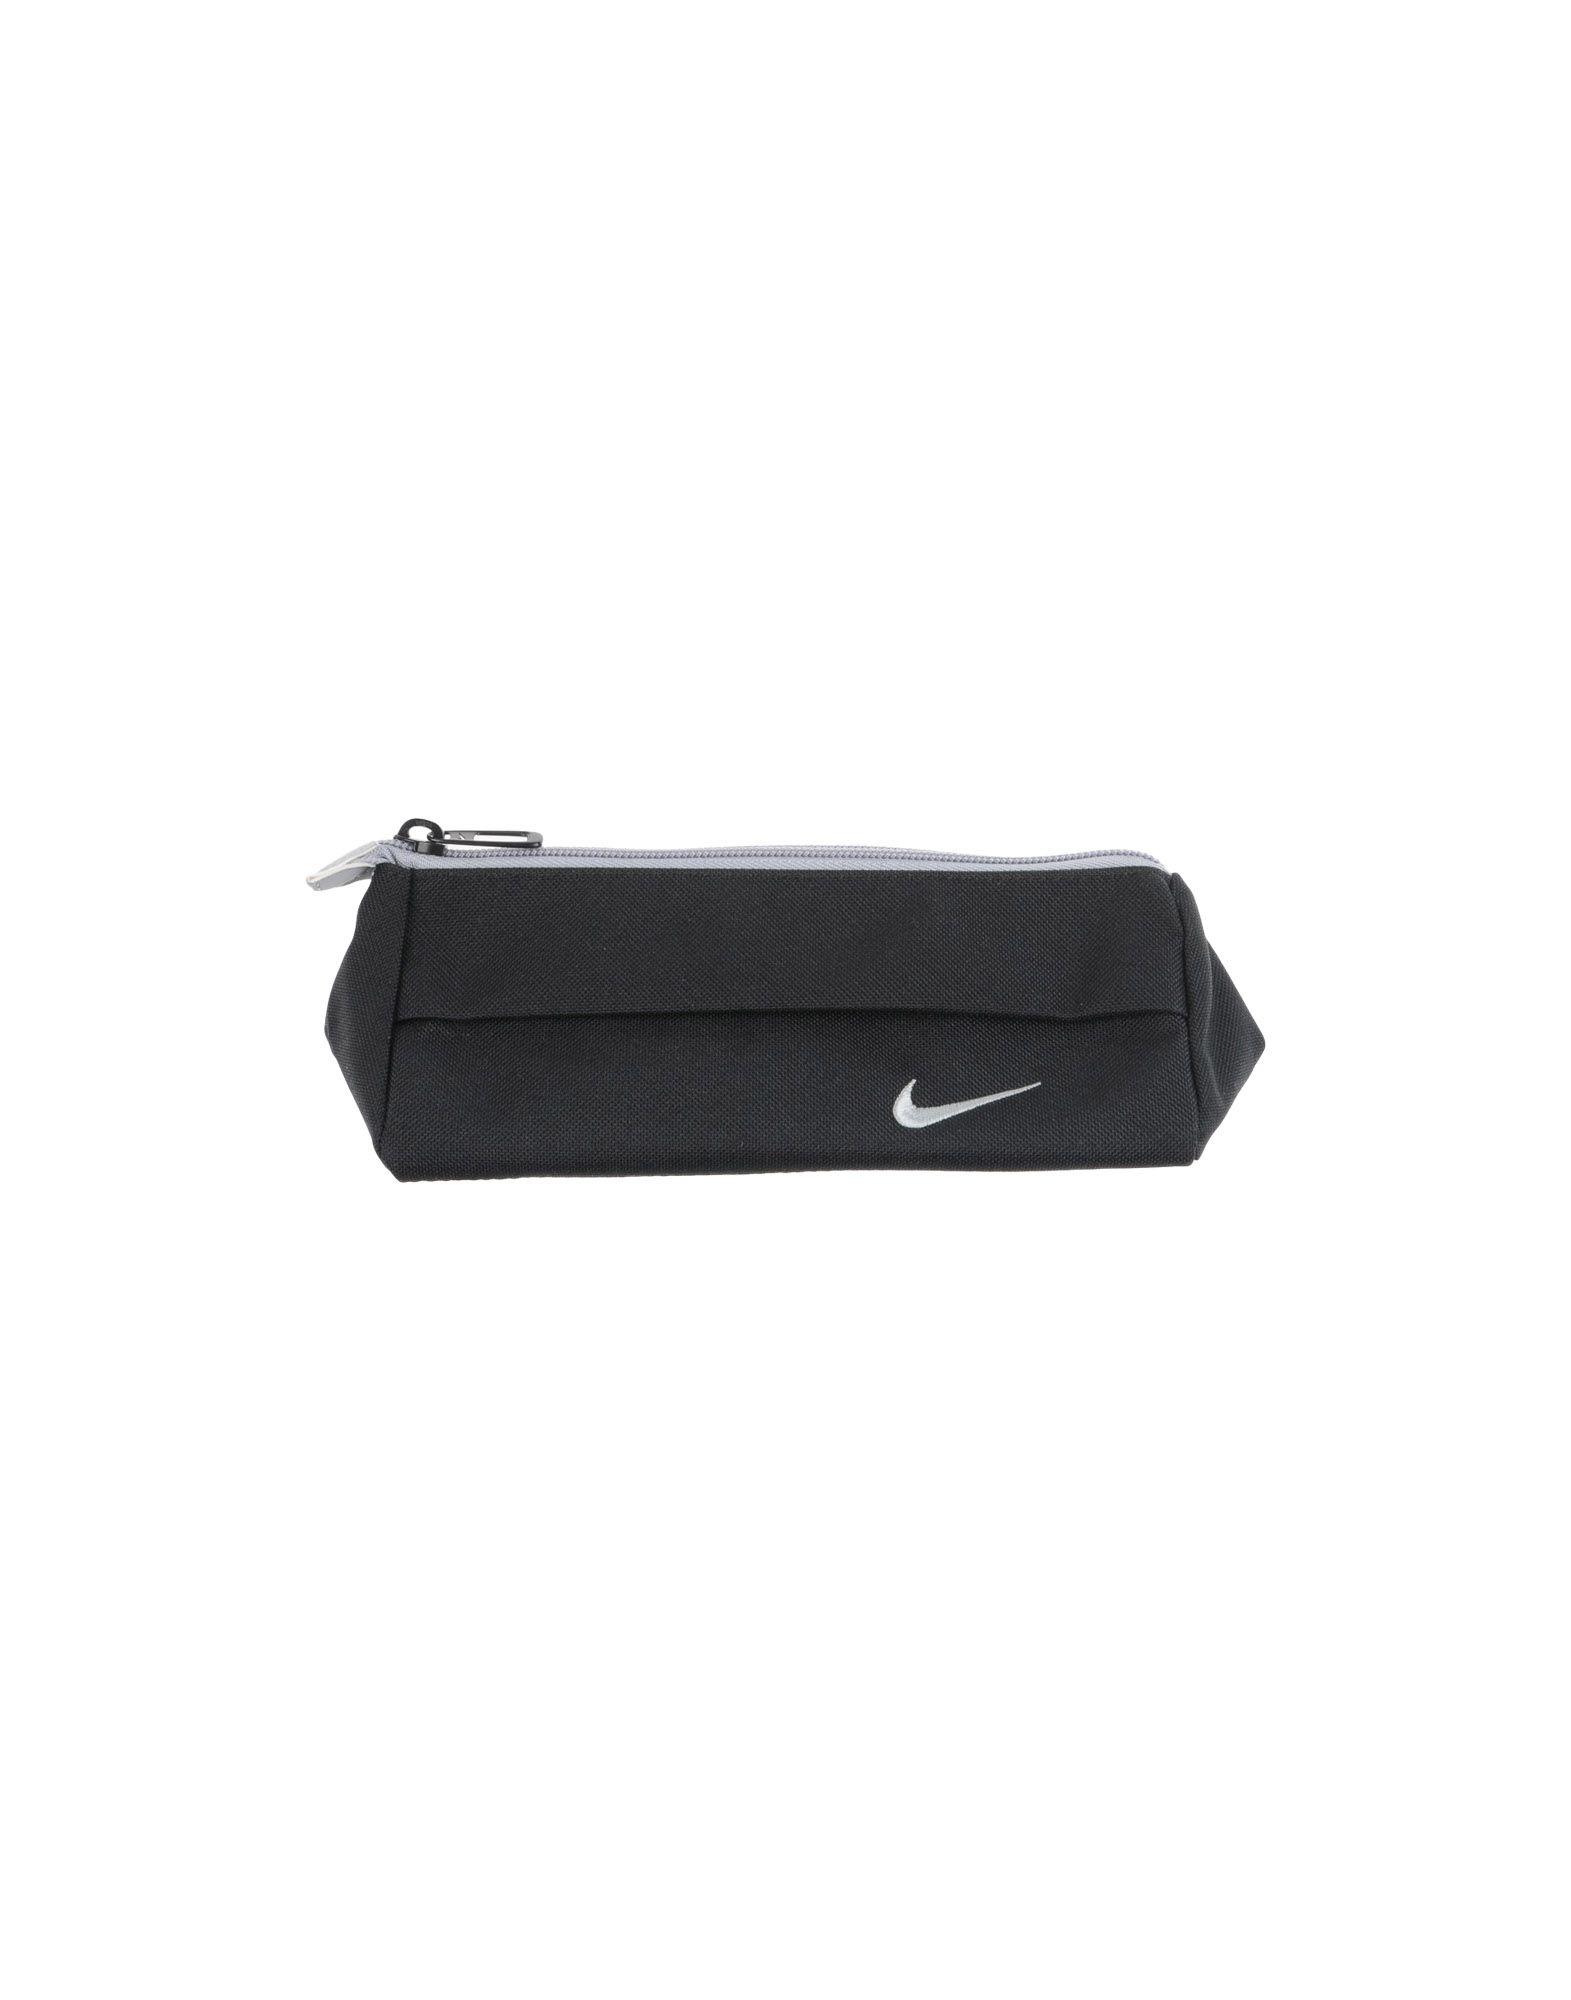 73 New Ideas Nike pencil case nz with New Drawing Ideas